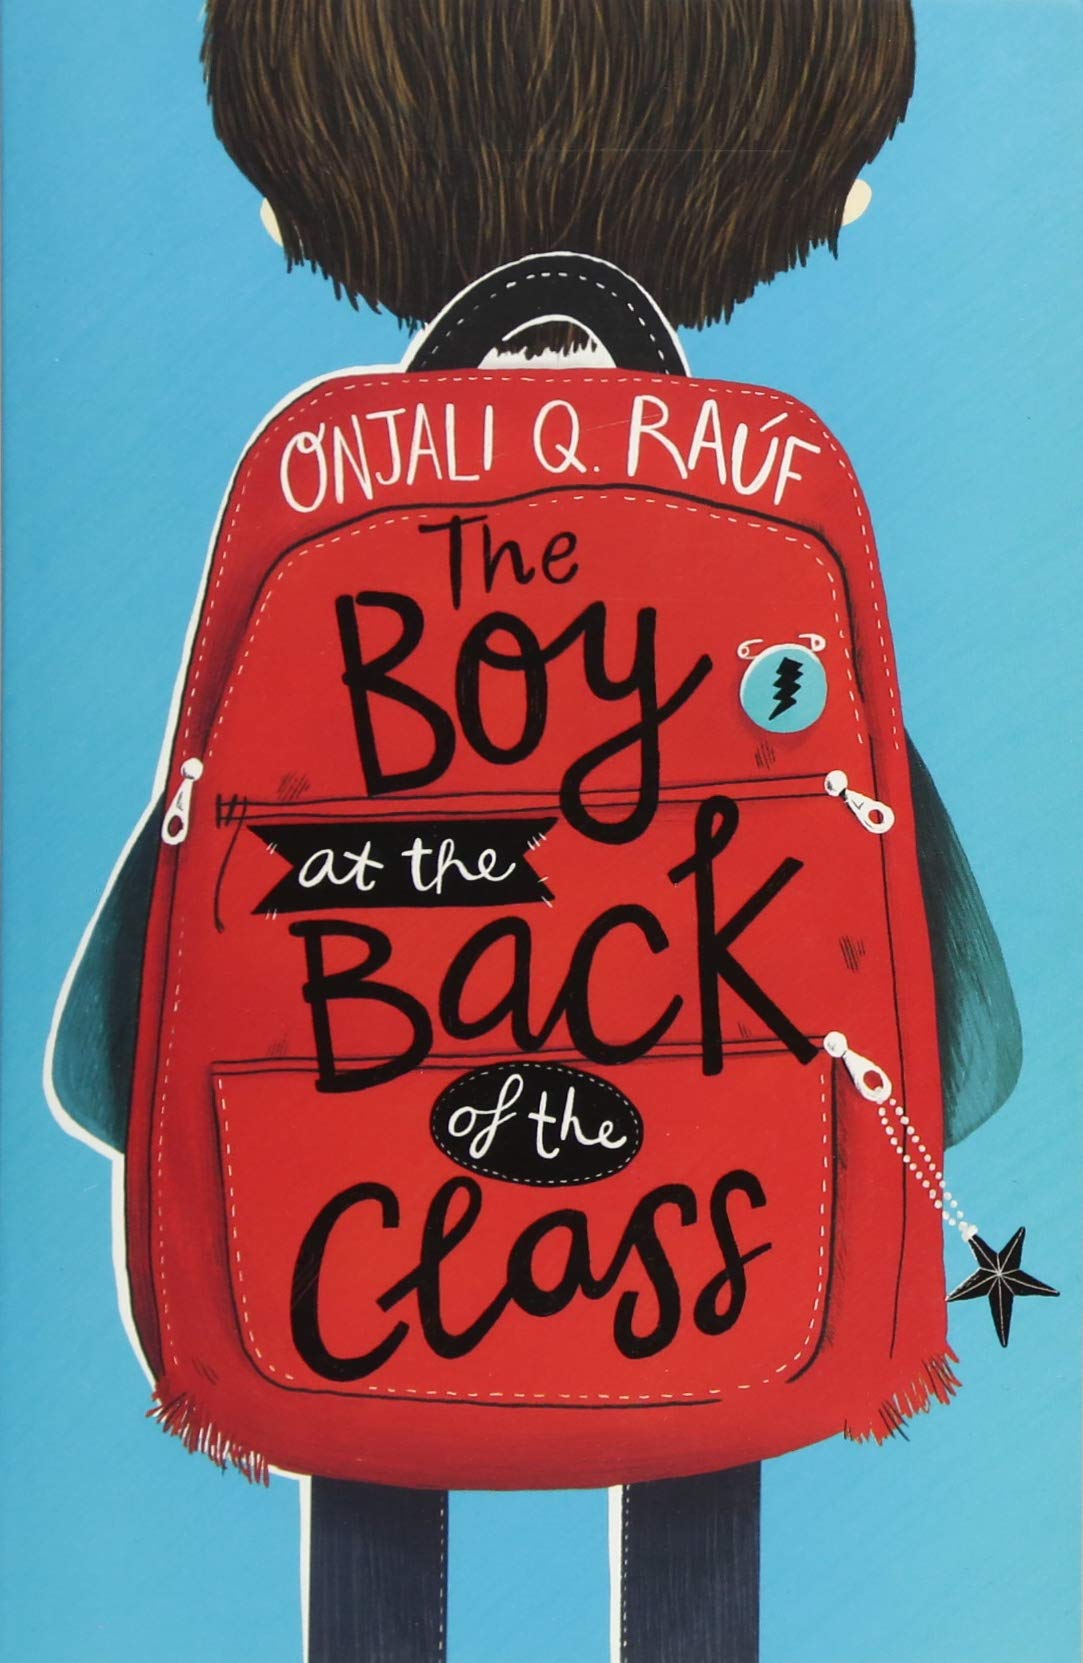 The Boy at the Back of the Class written by Onjali Q Rauf illustrated by Pippa Curnick